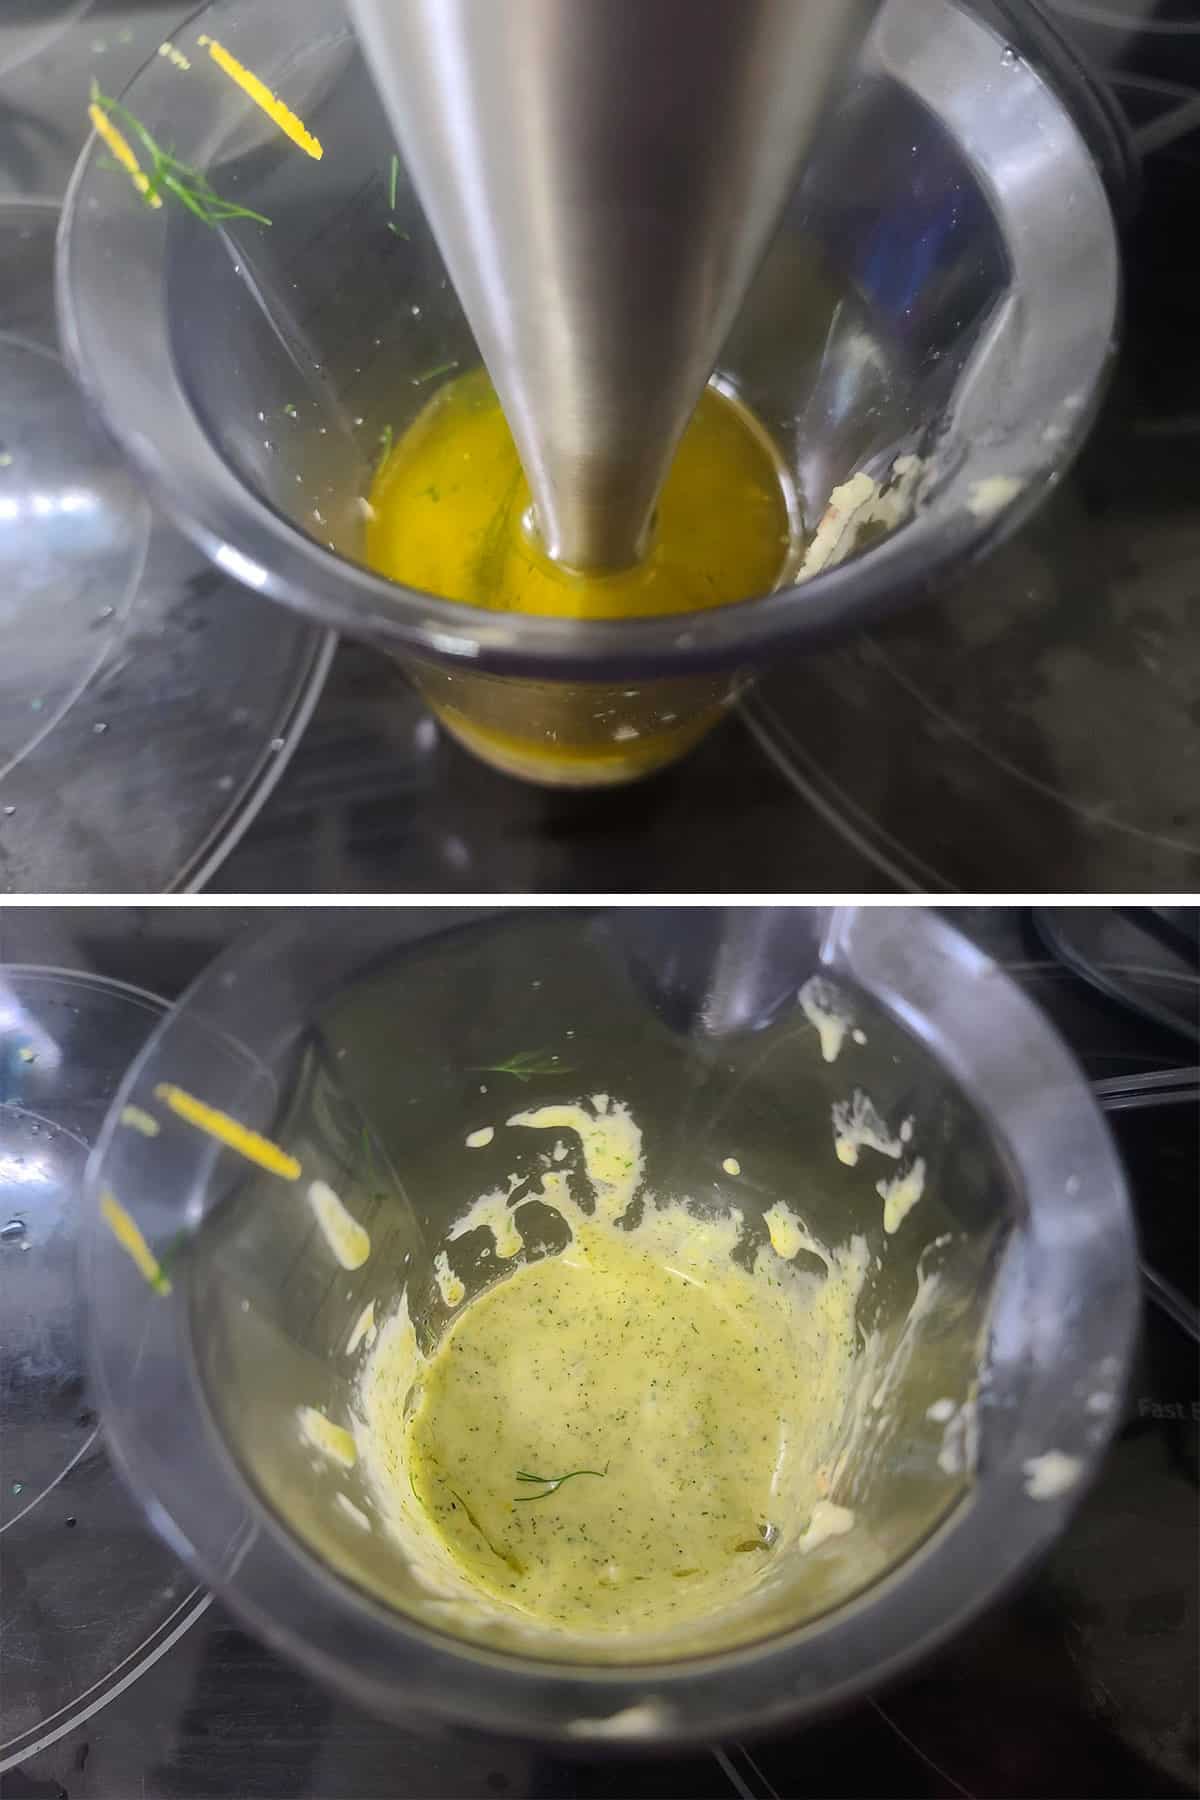 A 2 part image showing a stick blender being used to emulsify the dressing ingredients